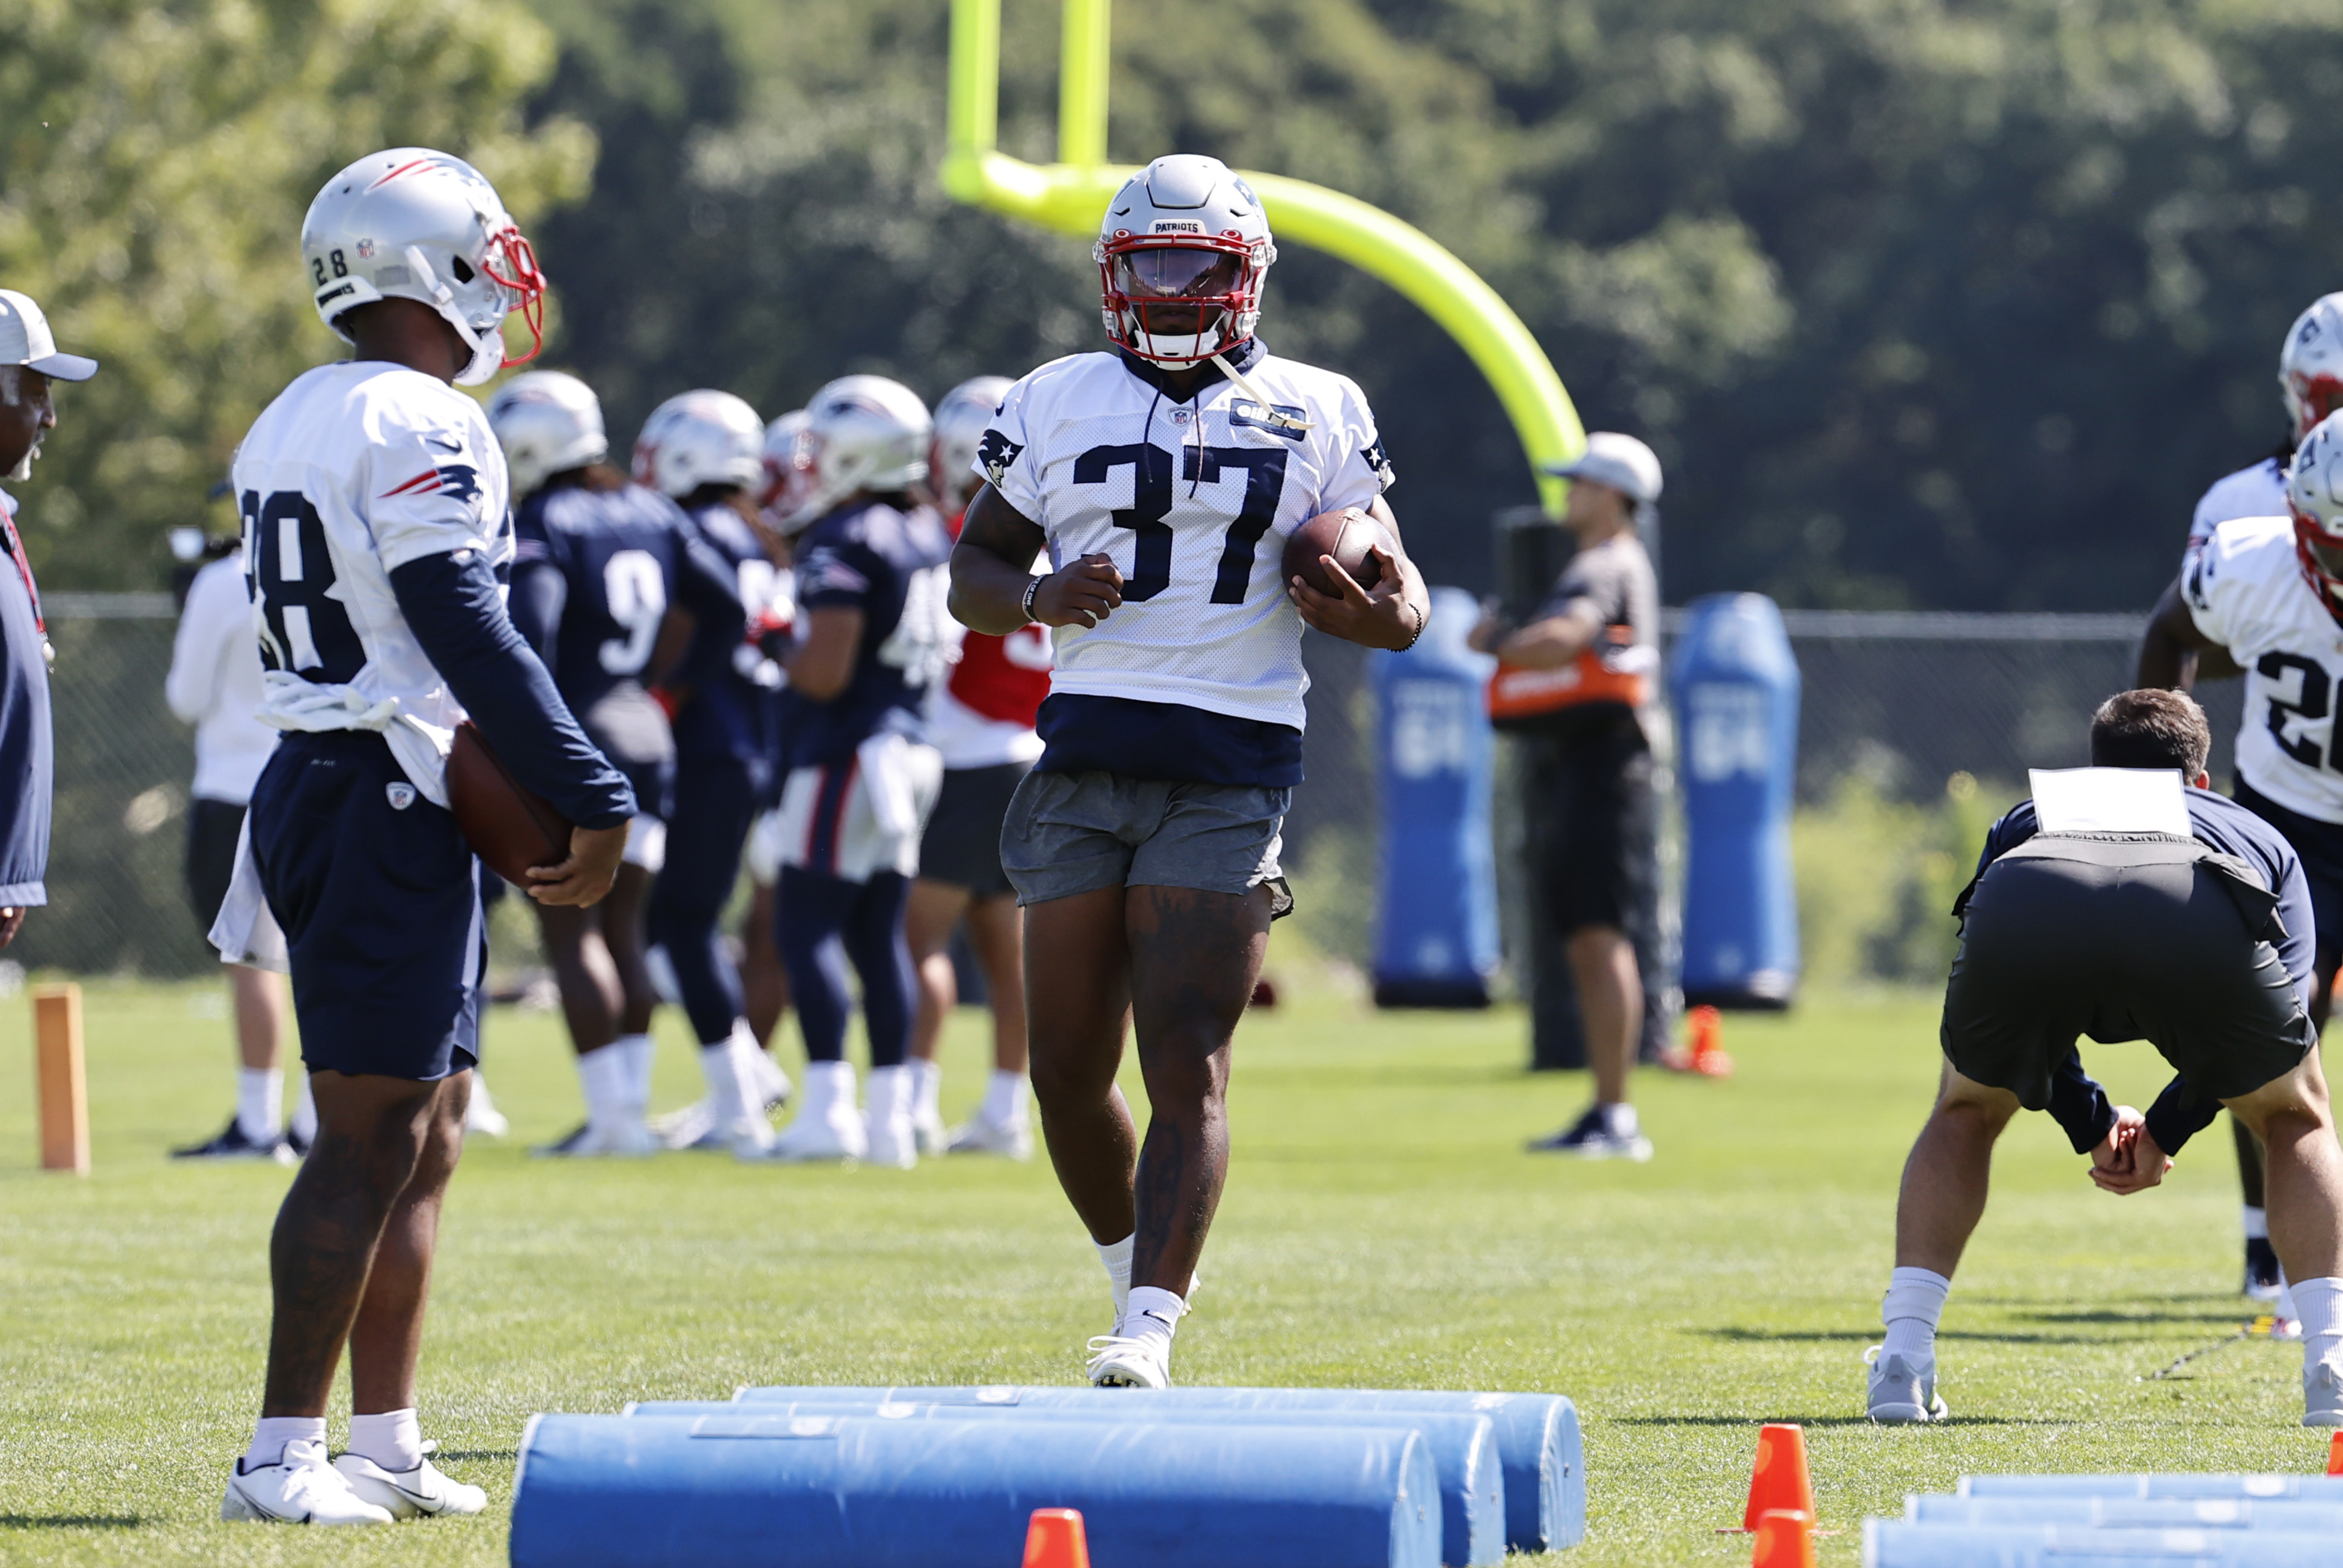 New England Patriots running back Damien Harris (37) runs a drill during New England Patriots training camp on July 31, 2021 at Gillette Stadium in Foxborough, Massachusetts.